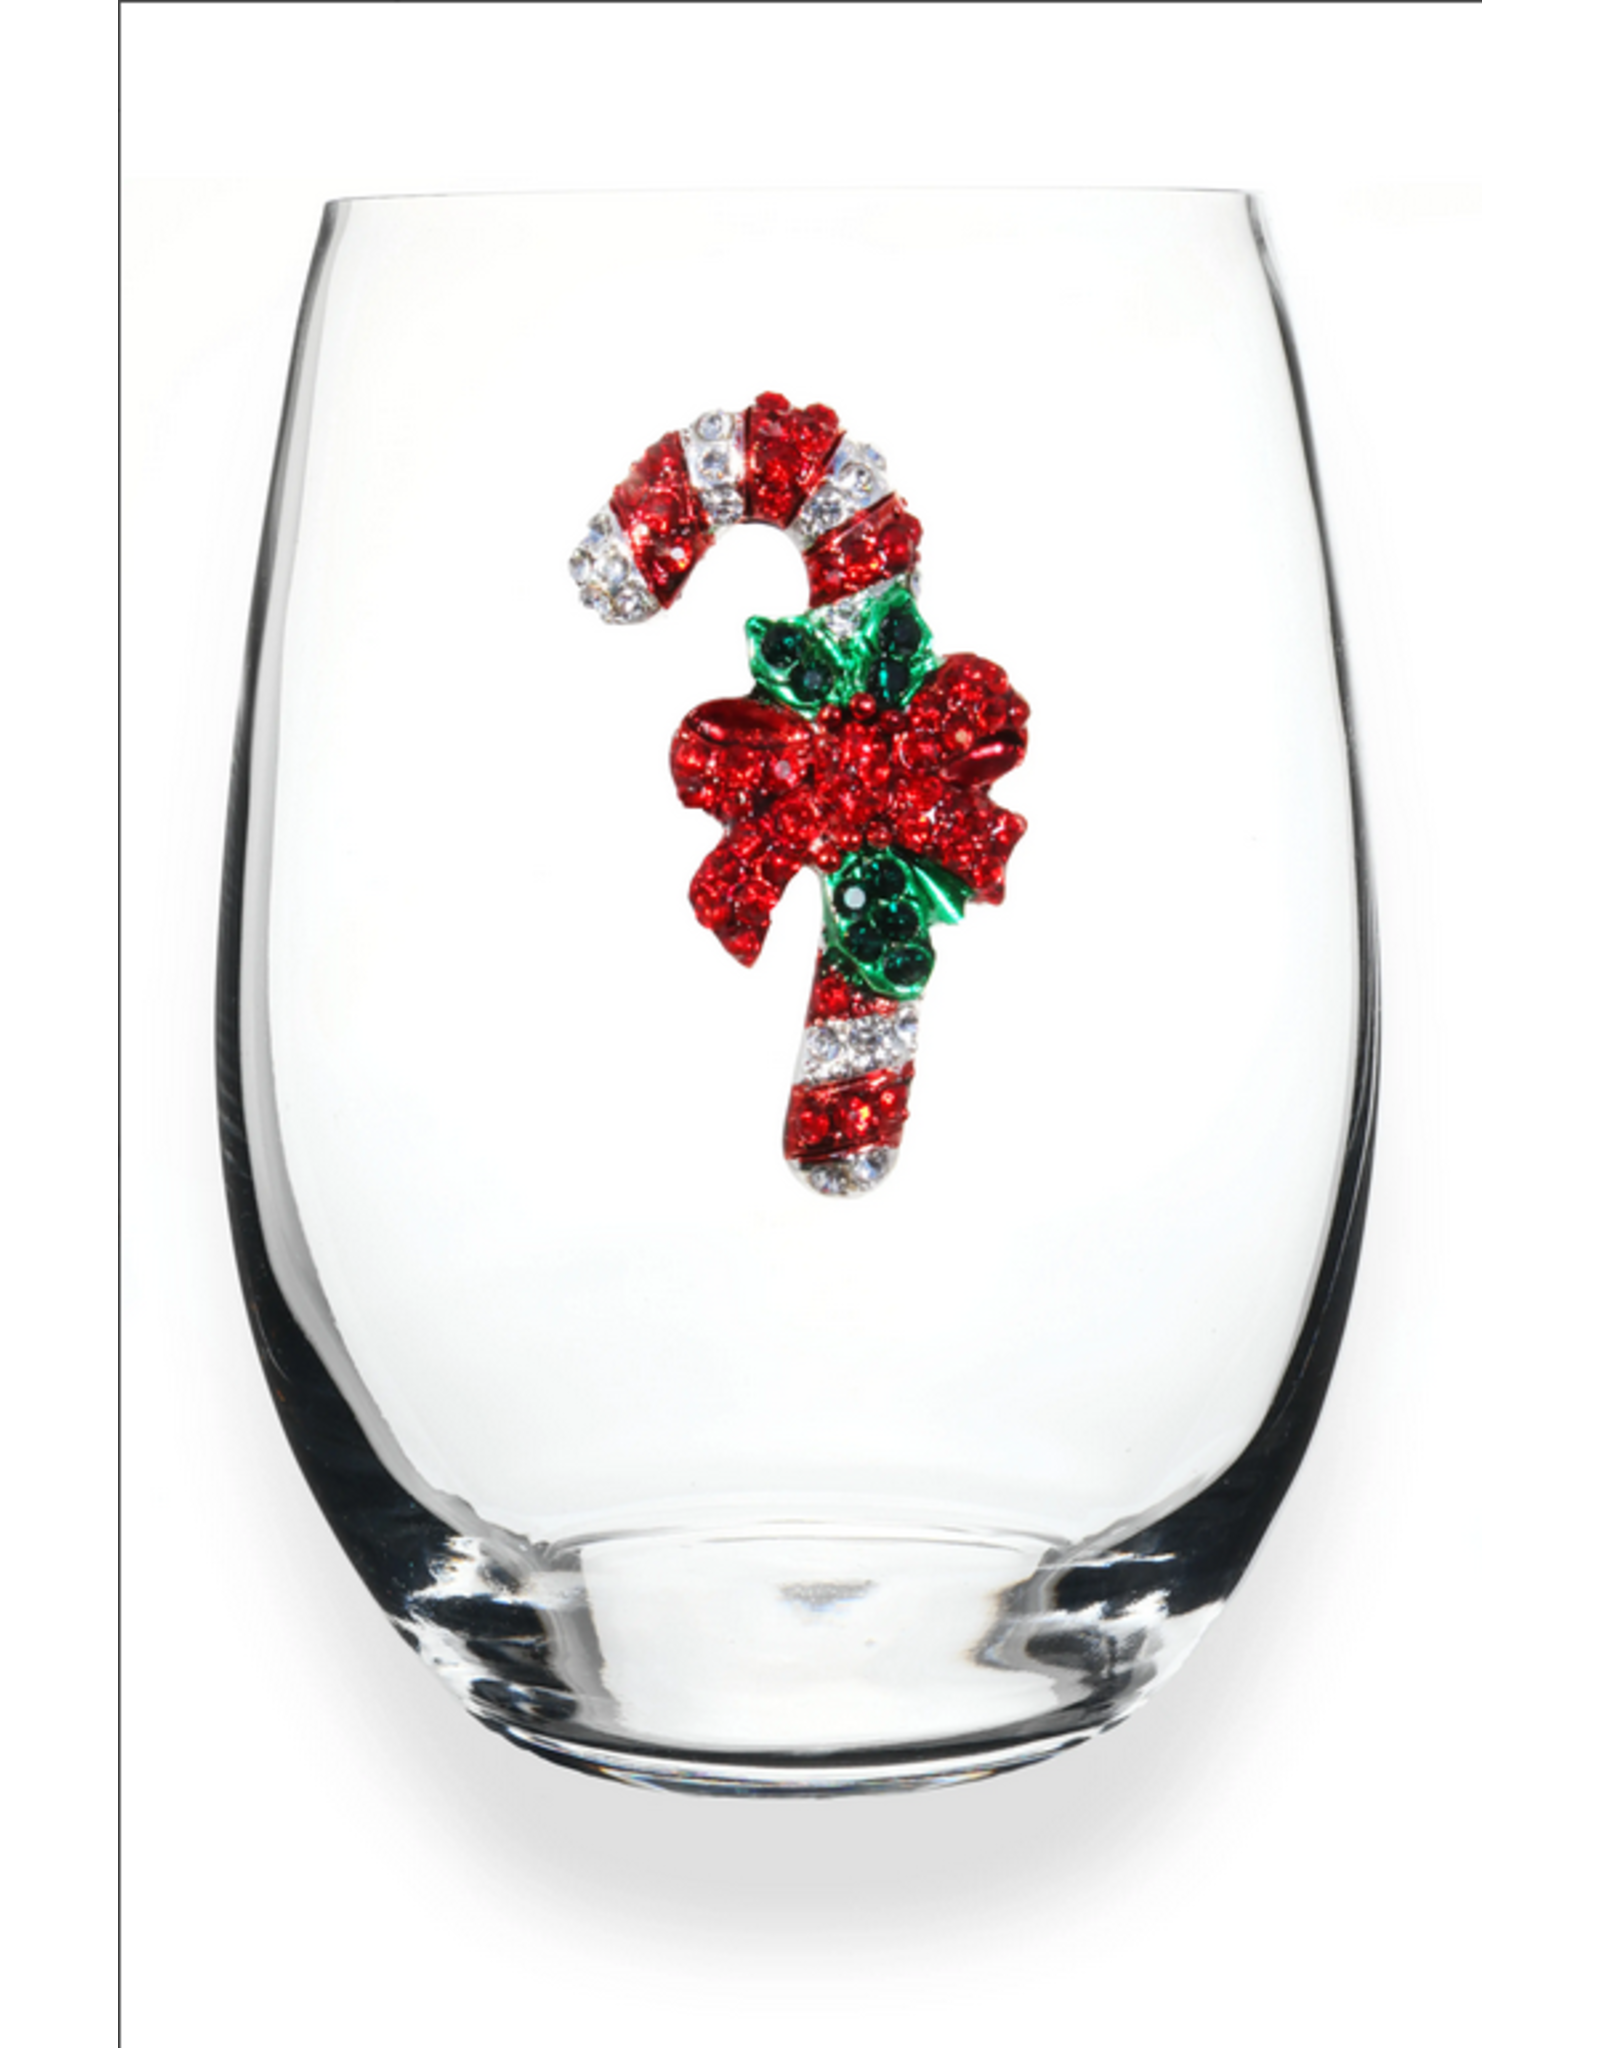 The Queens' Jewels Candy Cane Christmas Holiday Jeweled Stemless Wine Glass